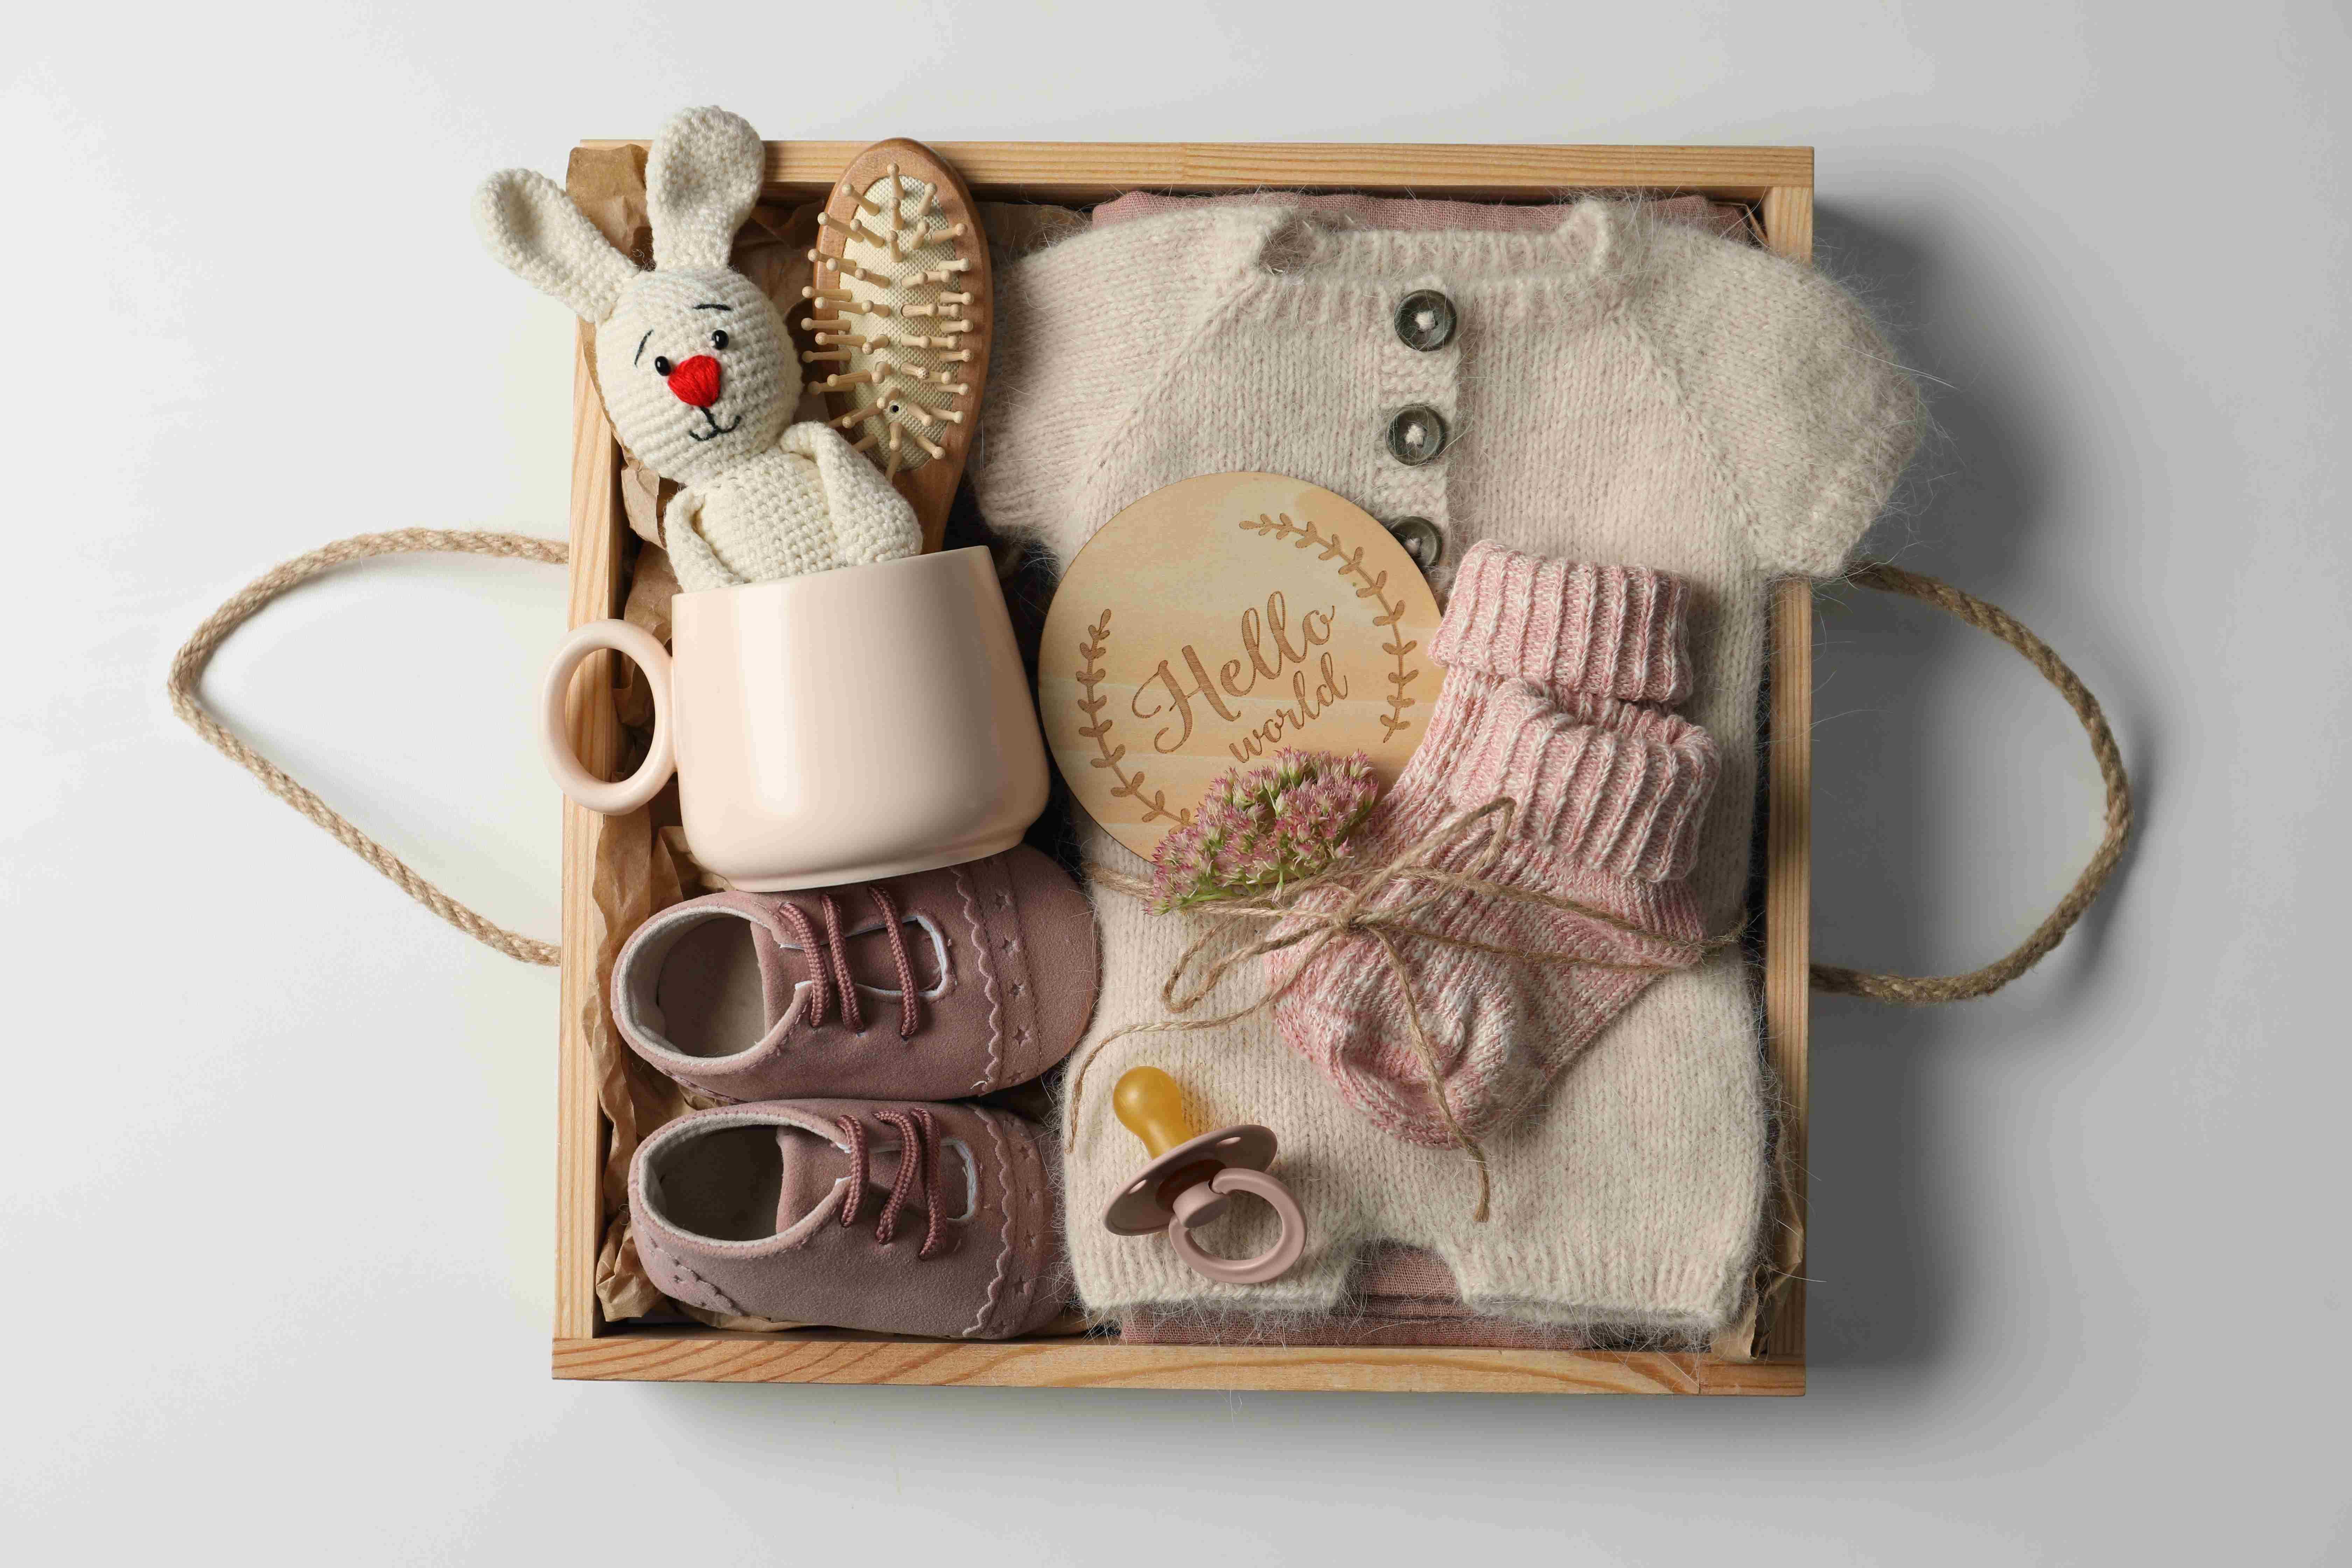 Read our post: Explore expert recommendations for choosing the perfect gifts for baby boys. Dive into age-appropriate options that inspire joy and development.